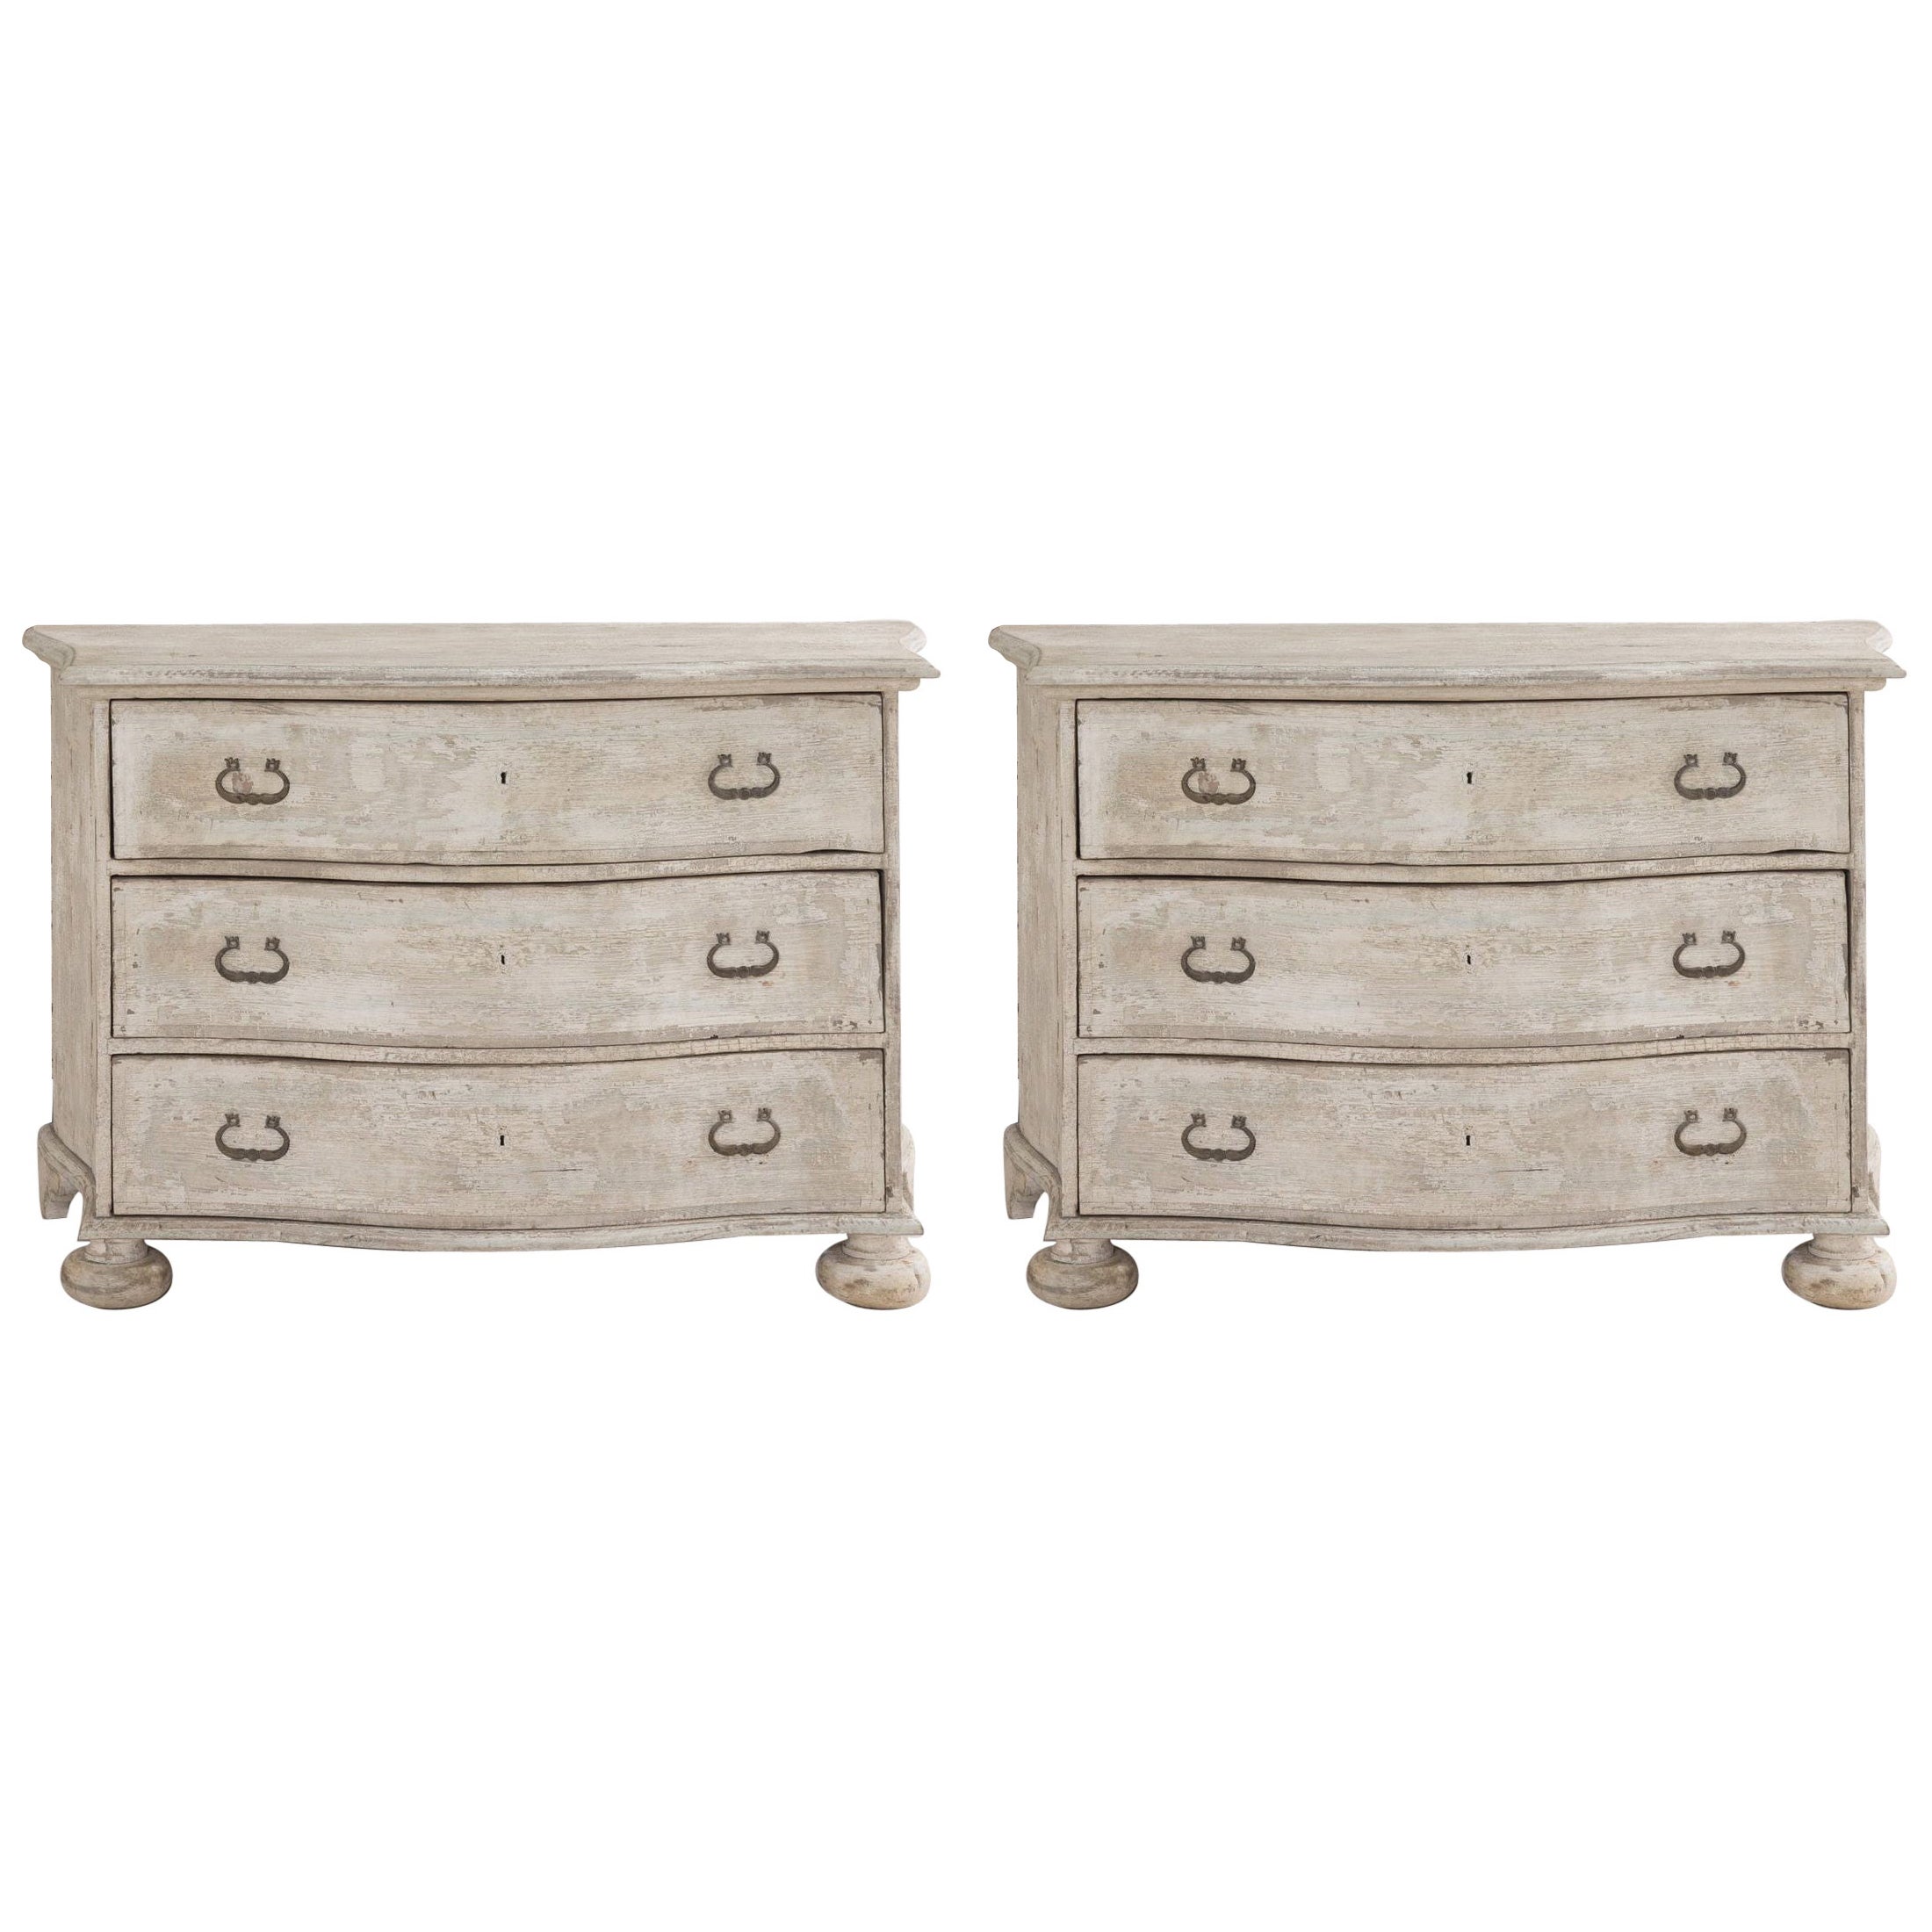 Pair of Large Painted Italian Baroque Style Bedside Commodes